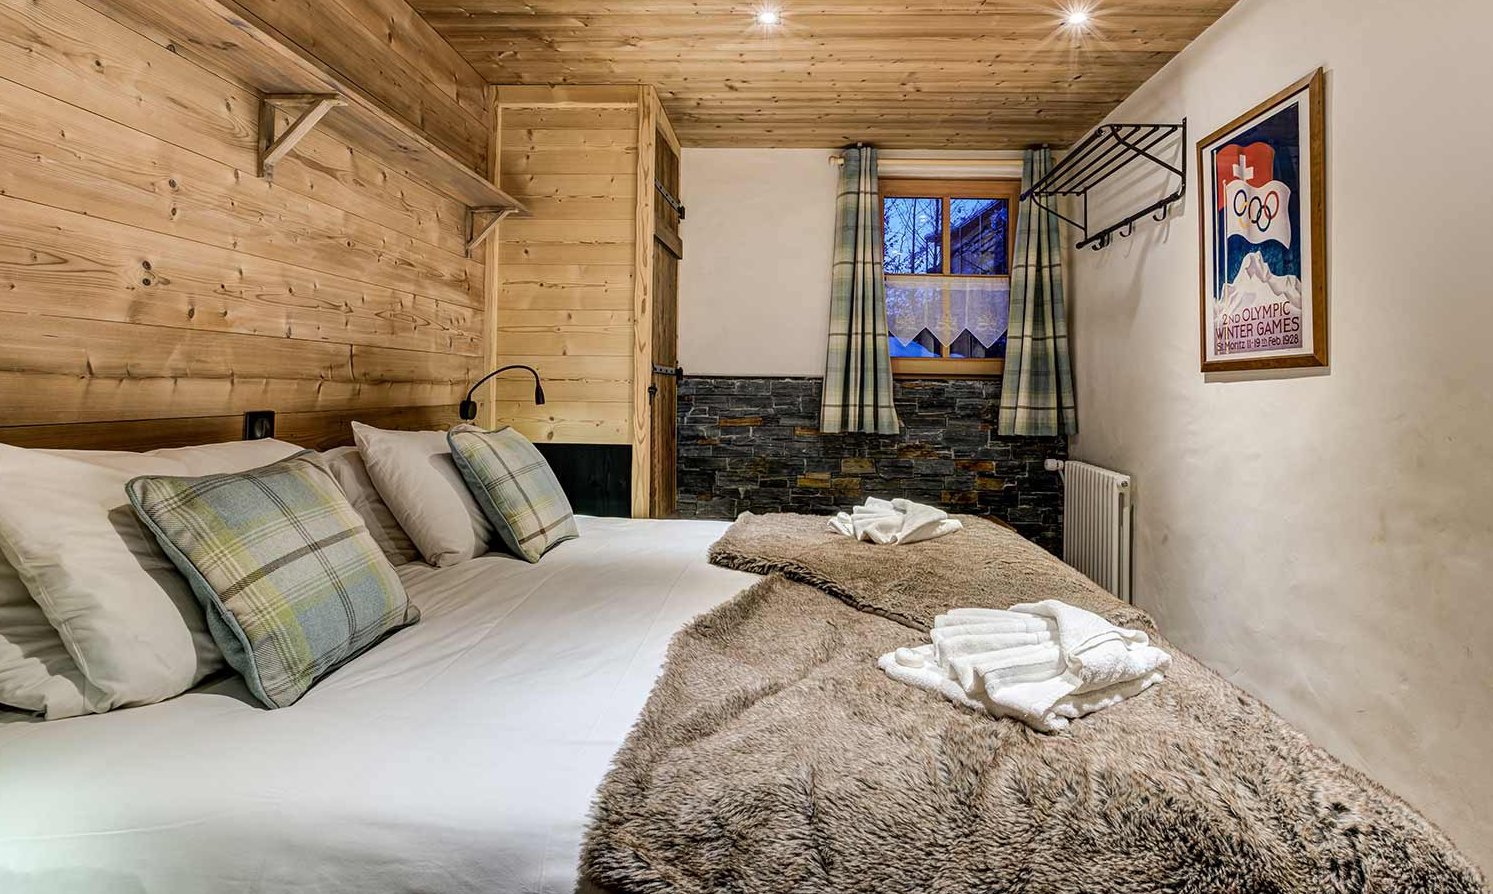 Chalet Jacques Bedroom